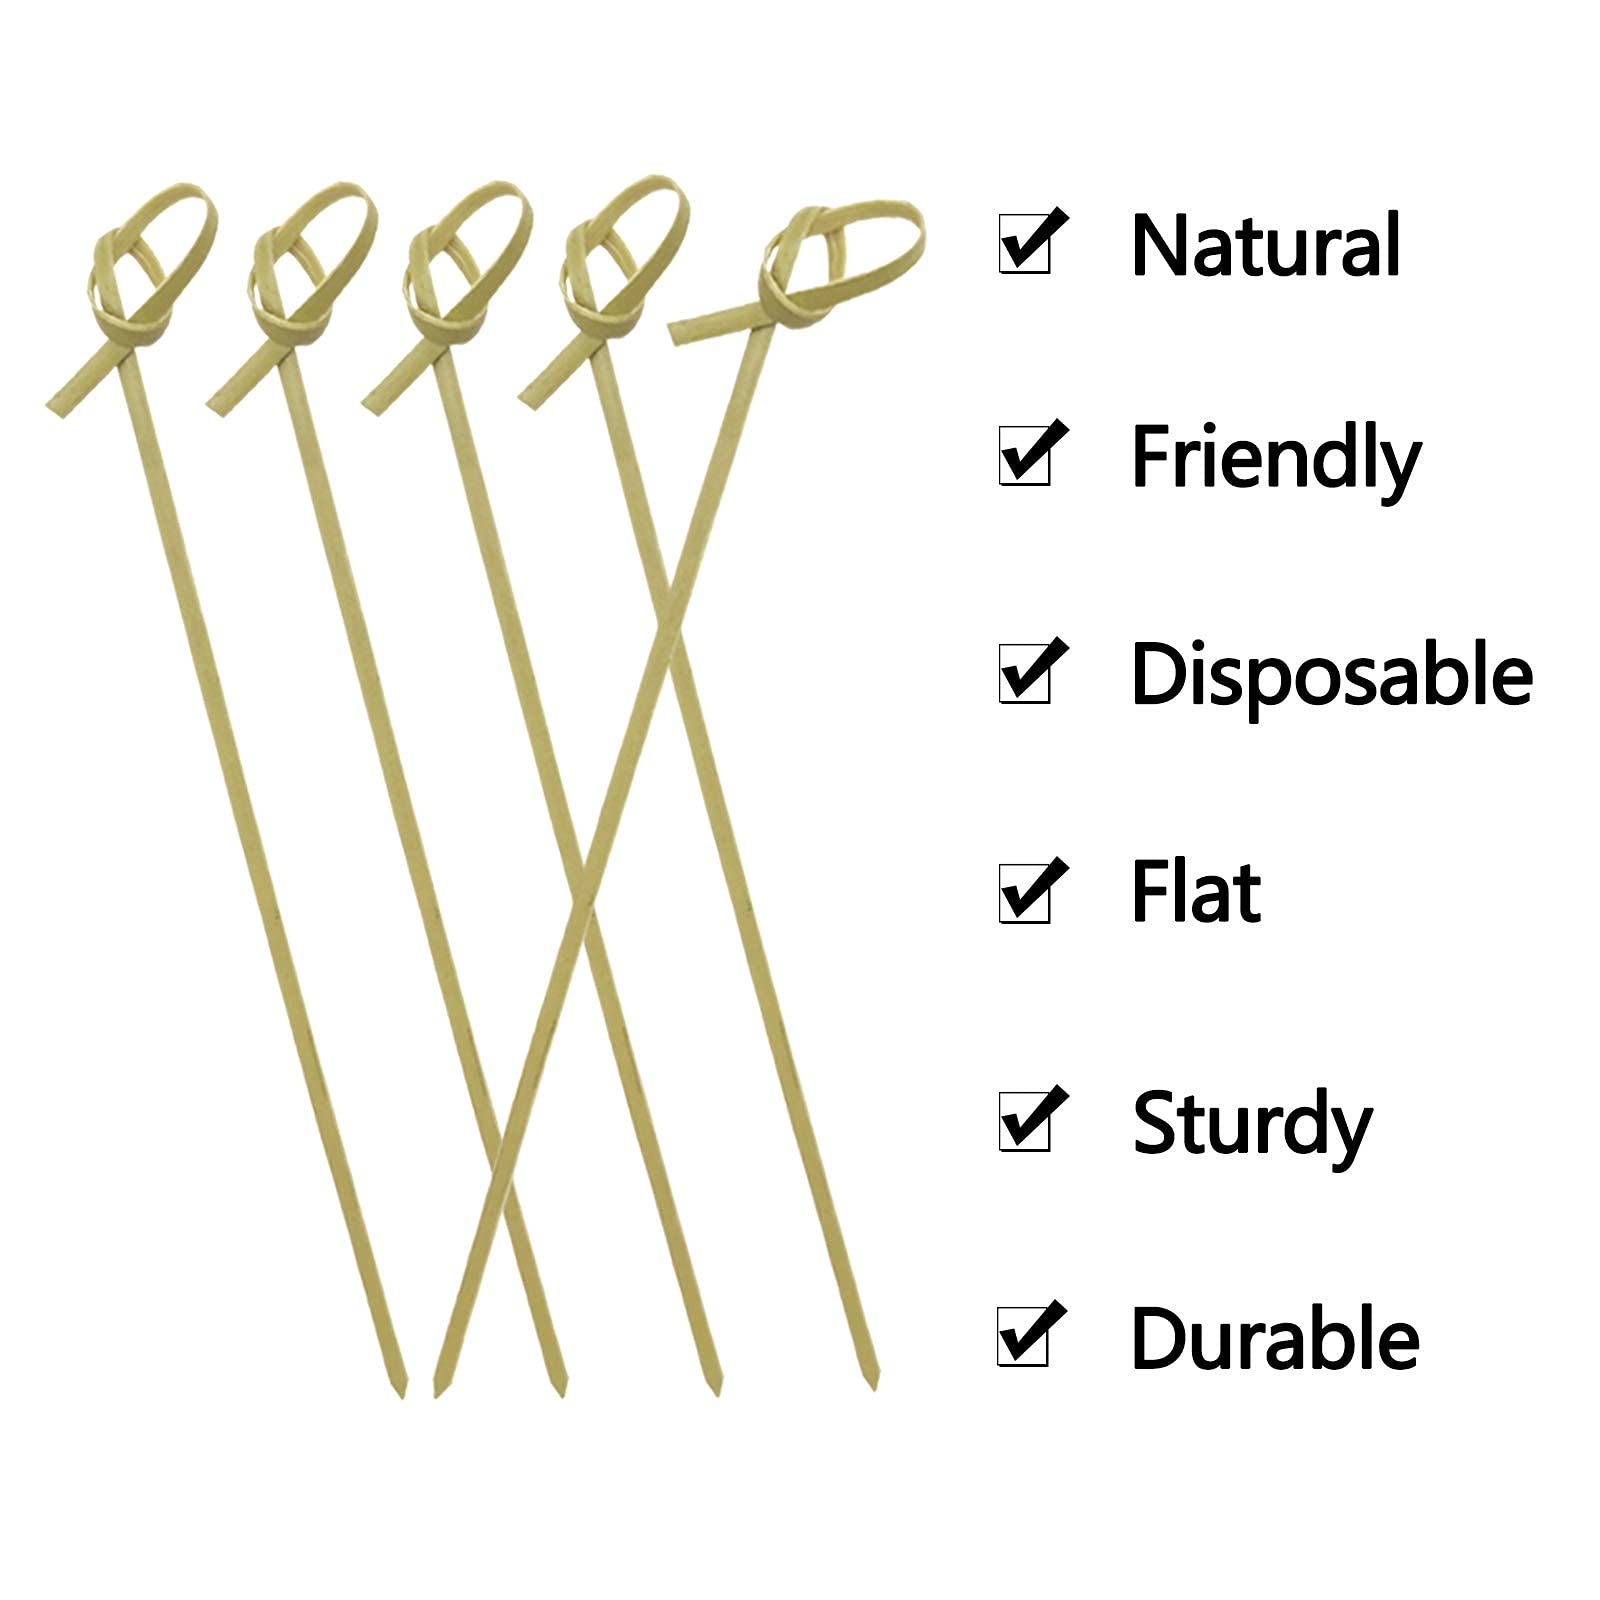 BLUE TOP Bamboo Cocktail Picks 200 PCS Bamboo Skewers 4 Inch with Looped Knot, Food Picks,Party Toothpicks for Appetizers,Cocktail Drinks,Barbecue Snacks,Club Sandwiches.